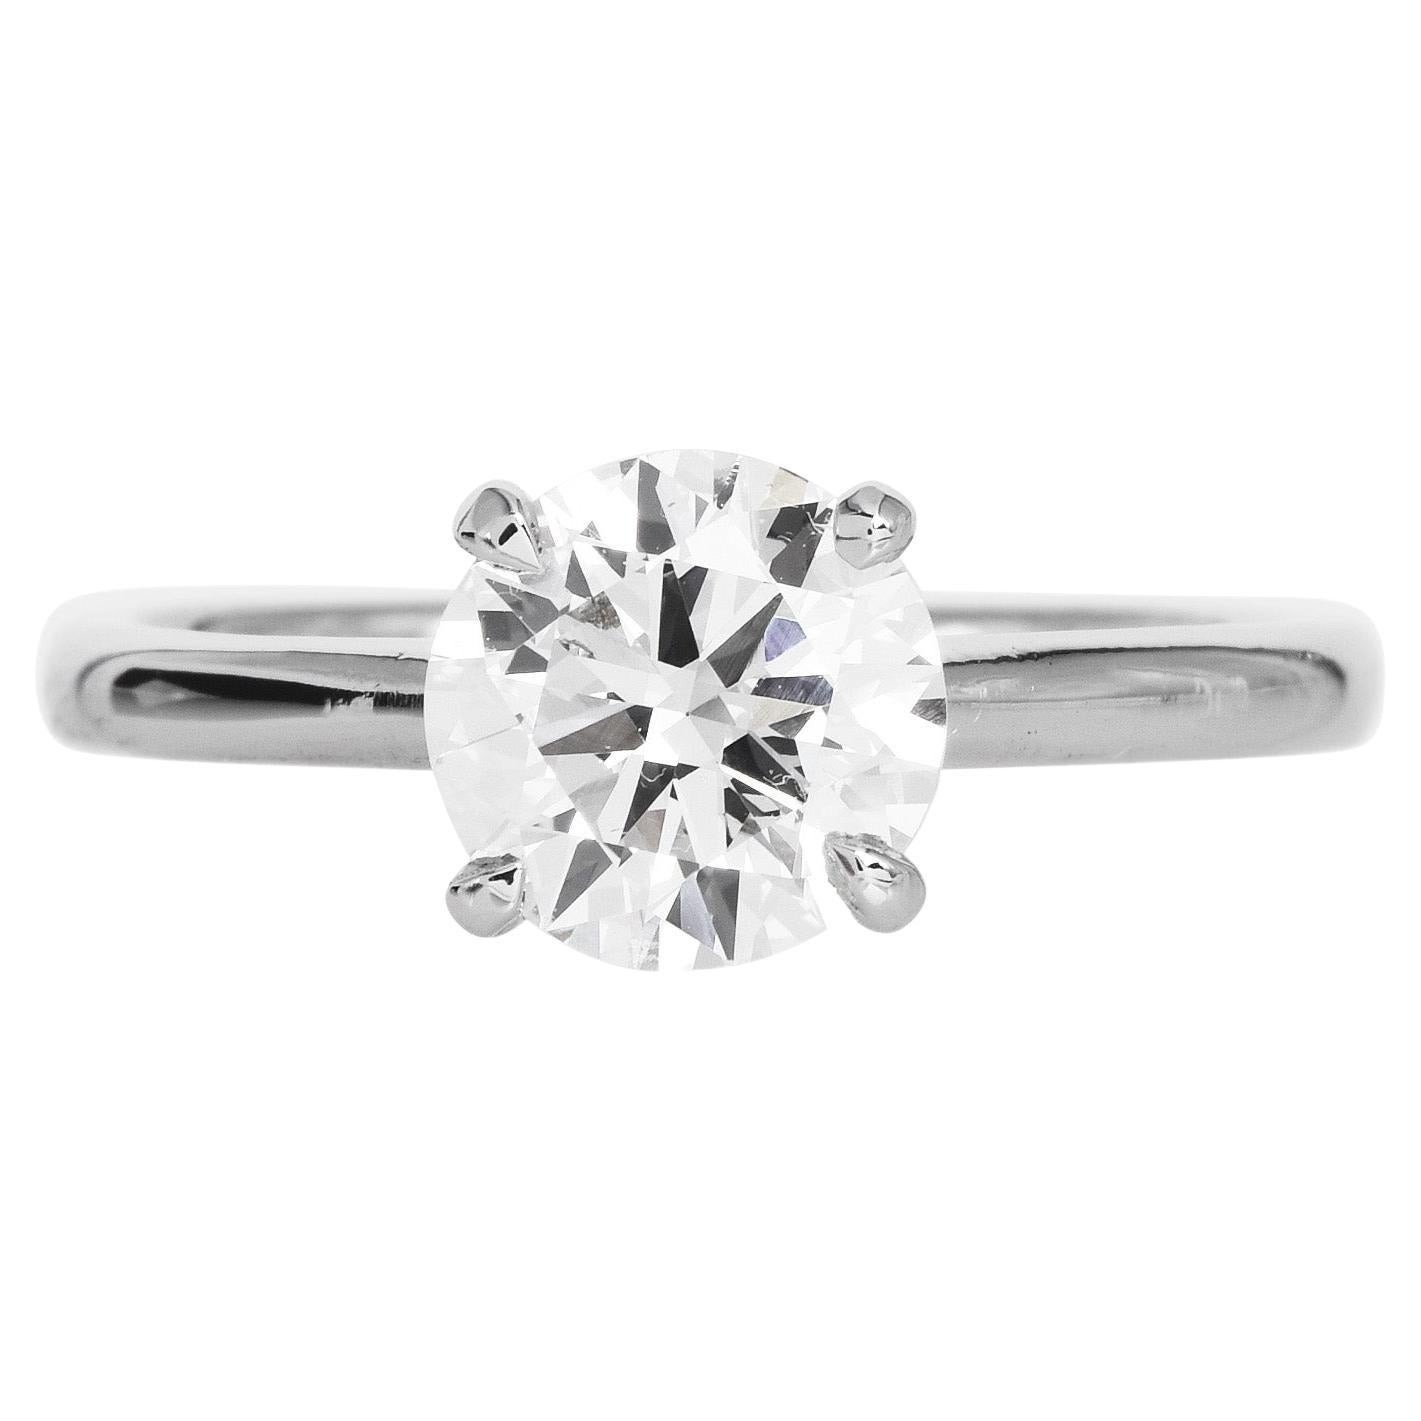 Dover GIA 1.56 Carat H VVS2 Round Cut White Gold Solitaire Wedding Ring